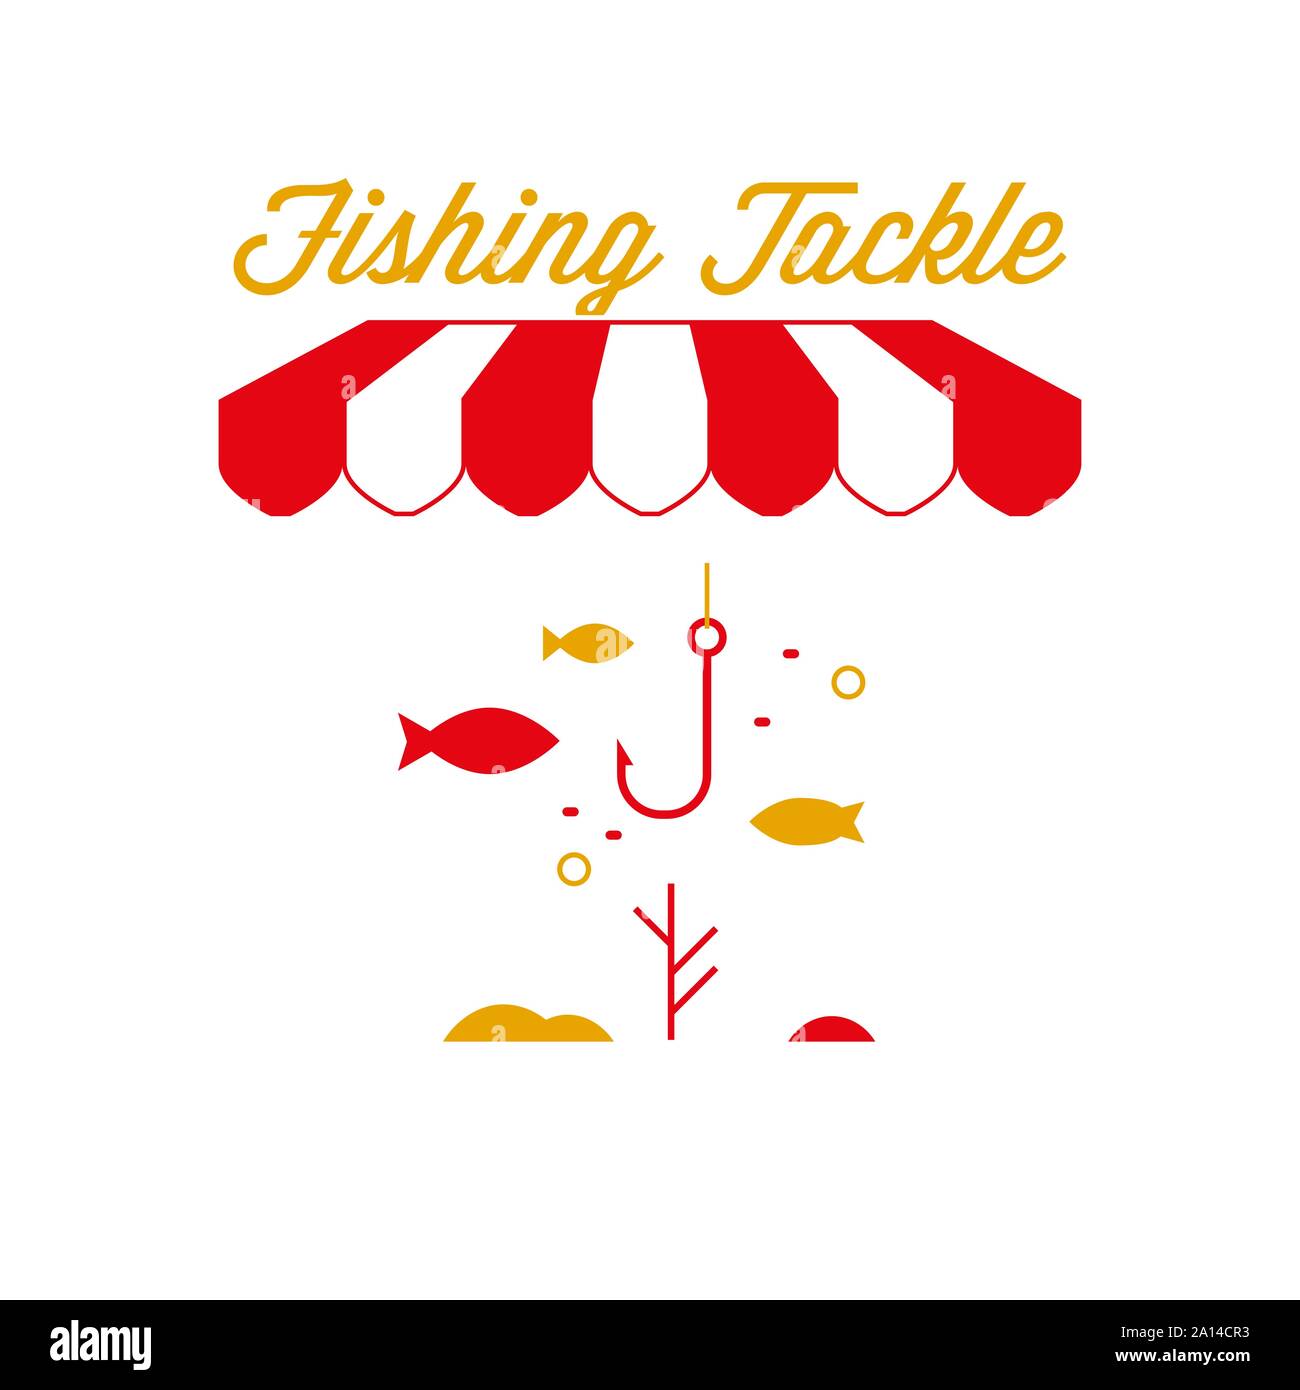 Fishing Tackle Shop Sign, Emblem. Red and White Striped Awning